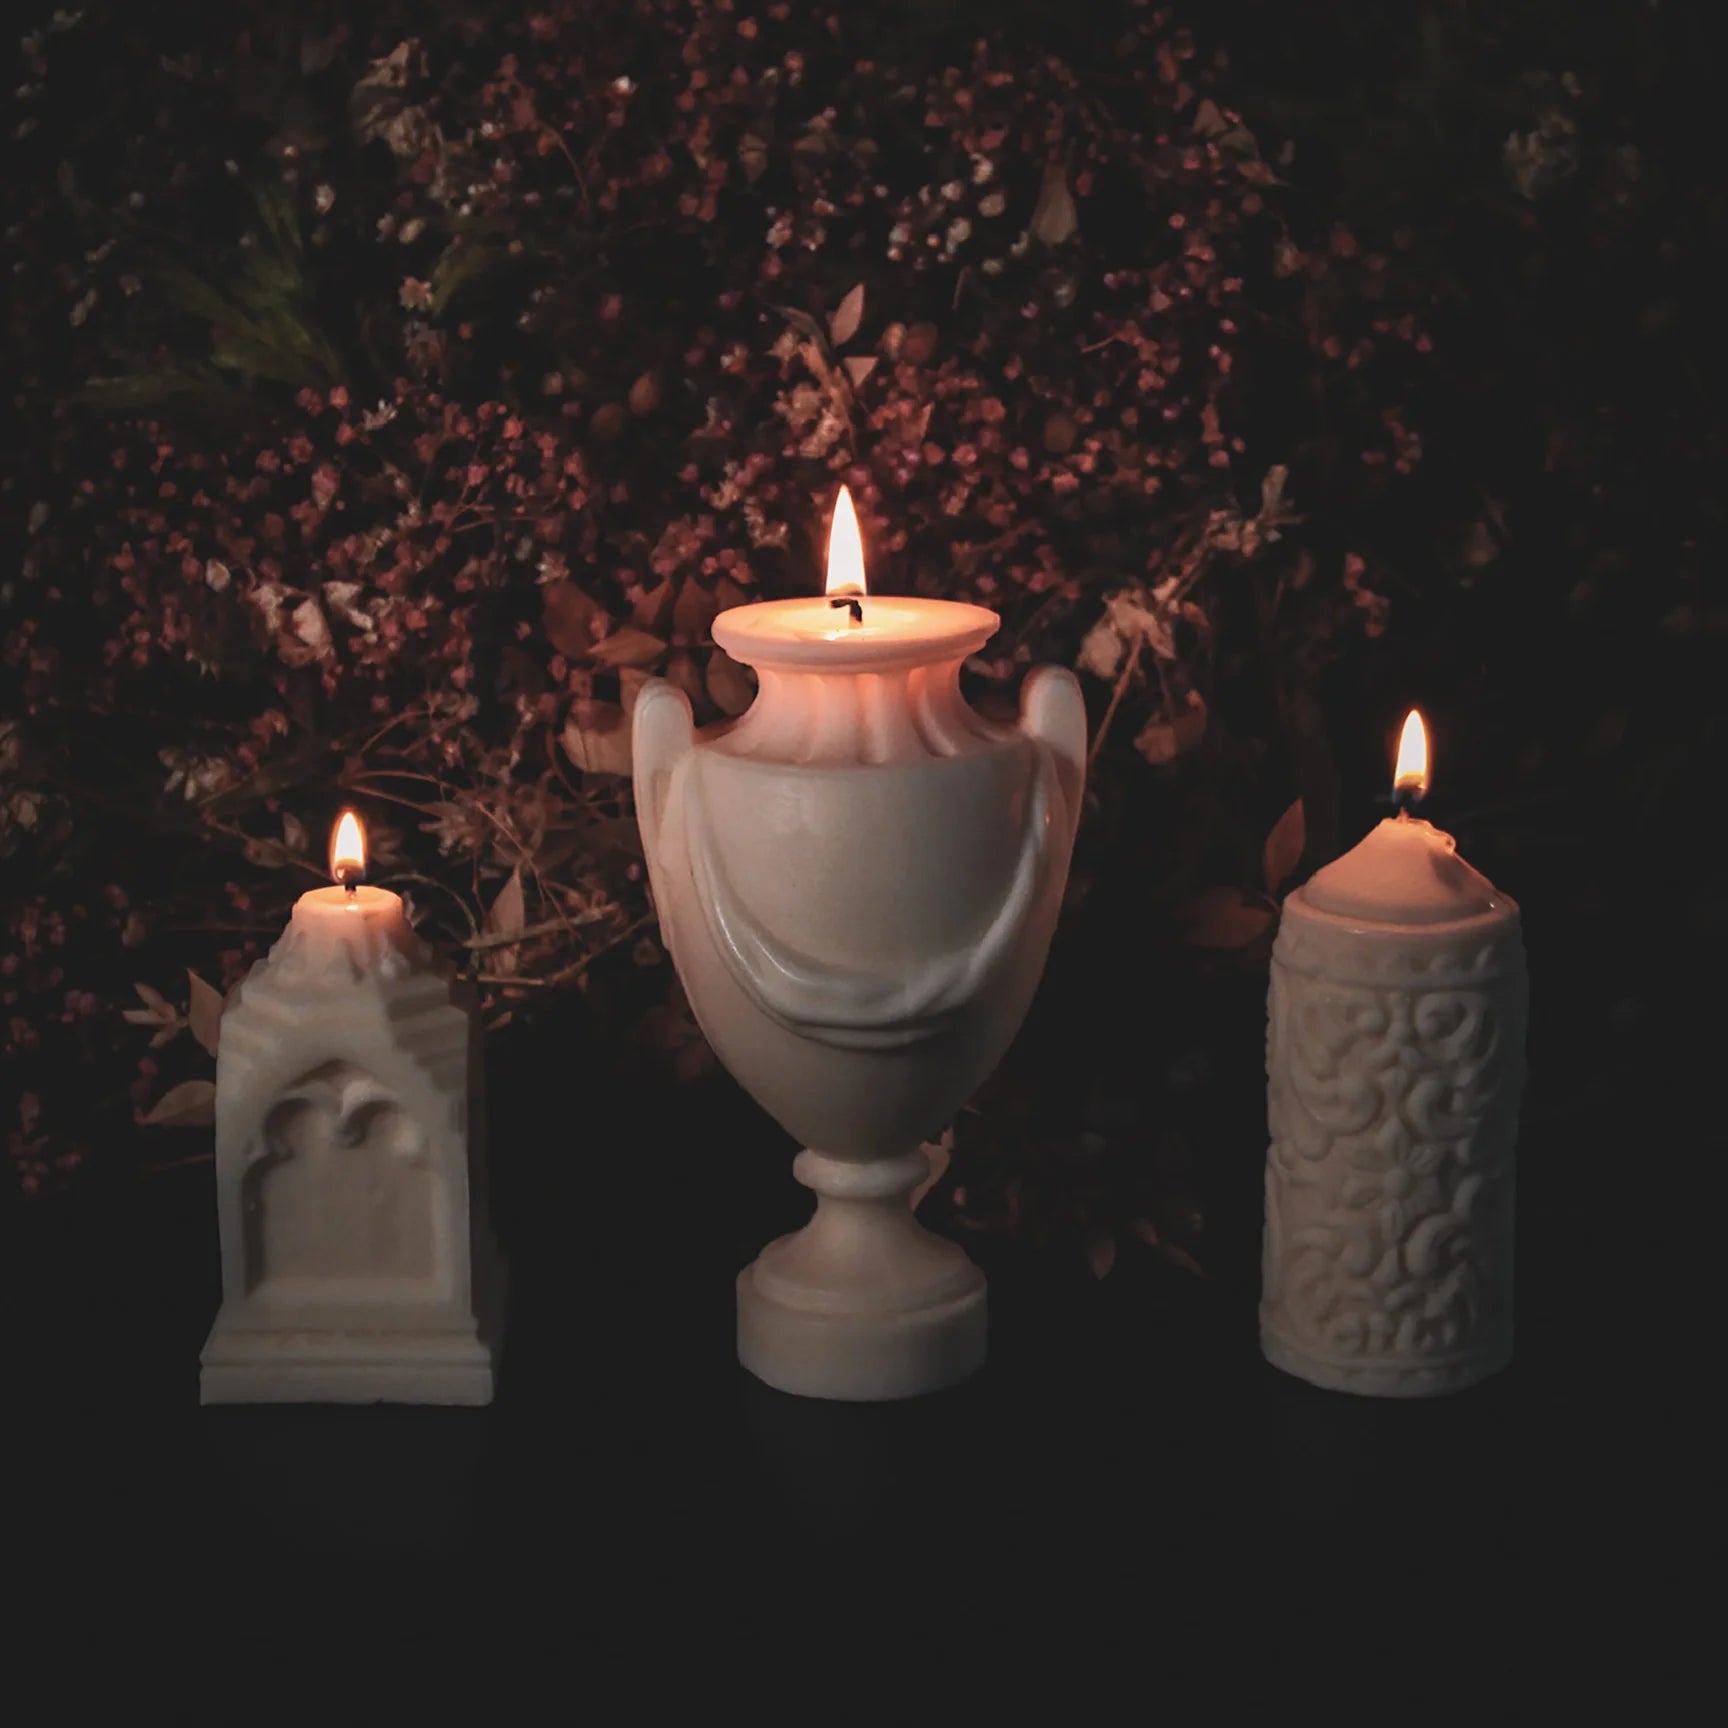 urn Candle Gothic candle Gift box The Blackened Teeth 